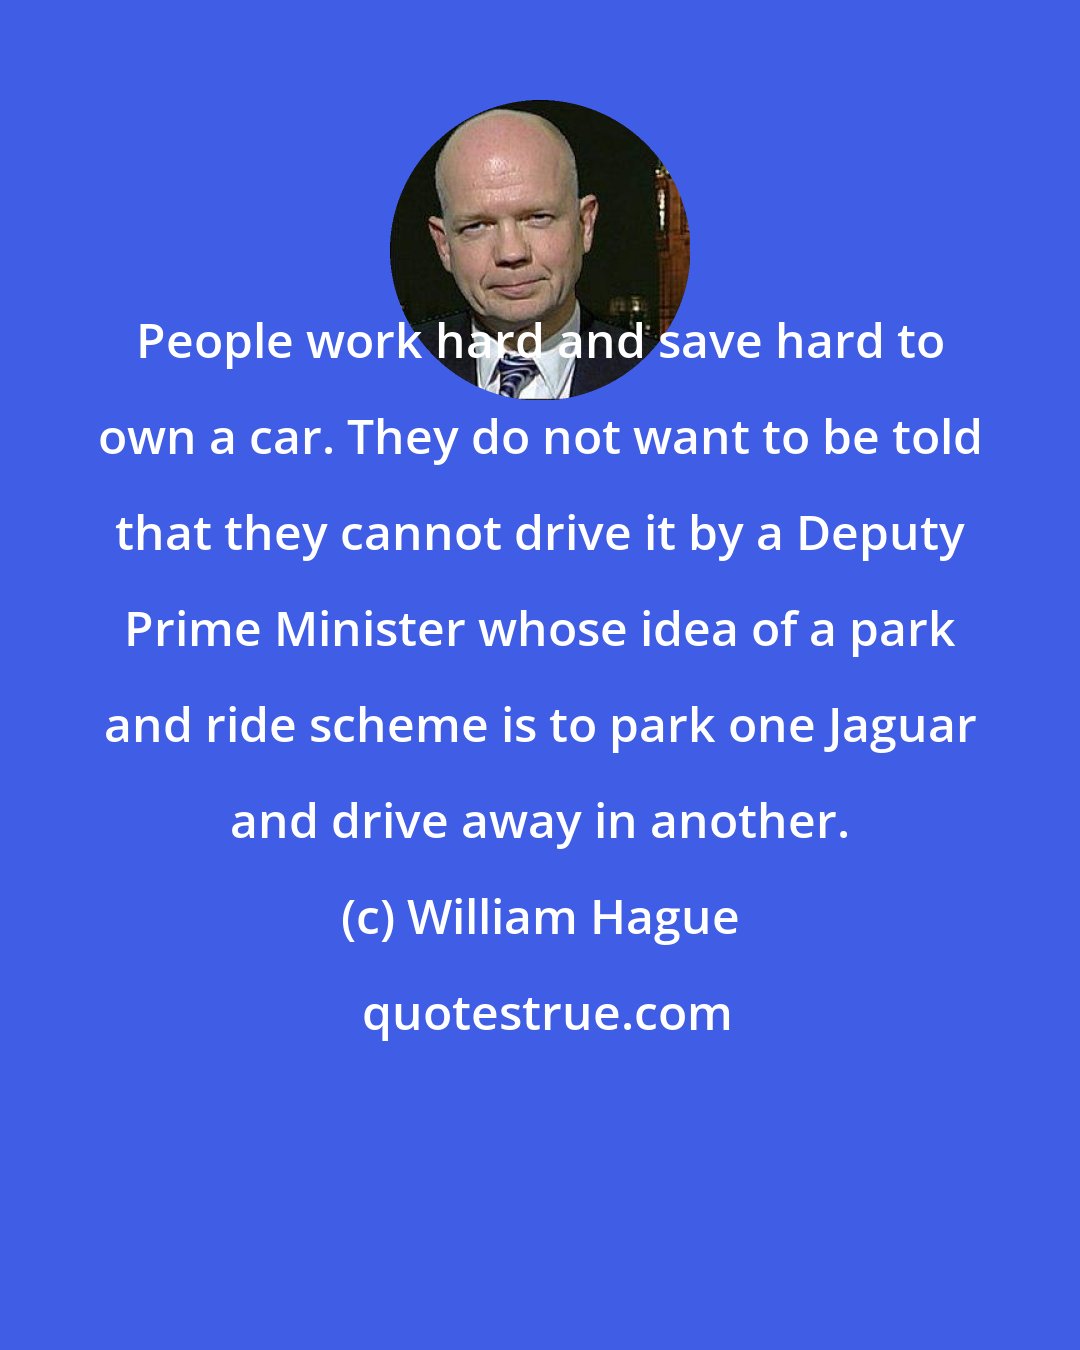 William Hague: People work hard and save hard to own a car. They do not want to be told that they cannot drive it by a Deputy Prime Minister whose idea of a park and ride scheme is to park one Jaguar and drive away in another.